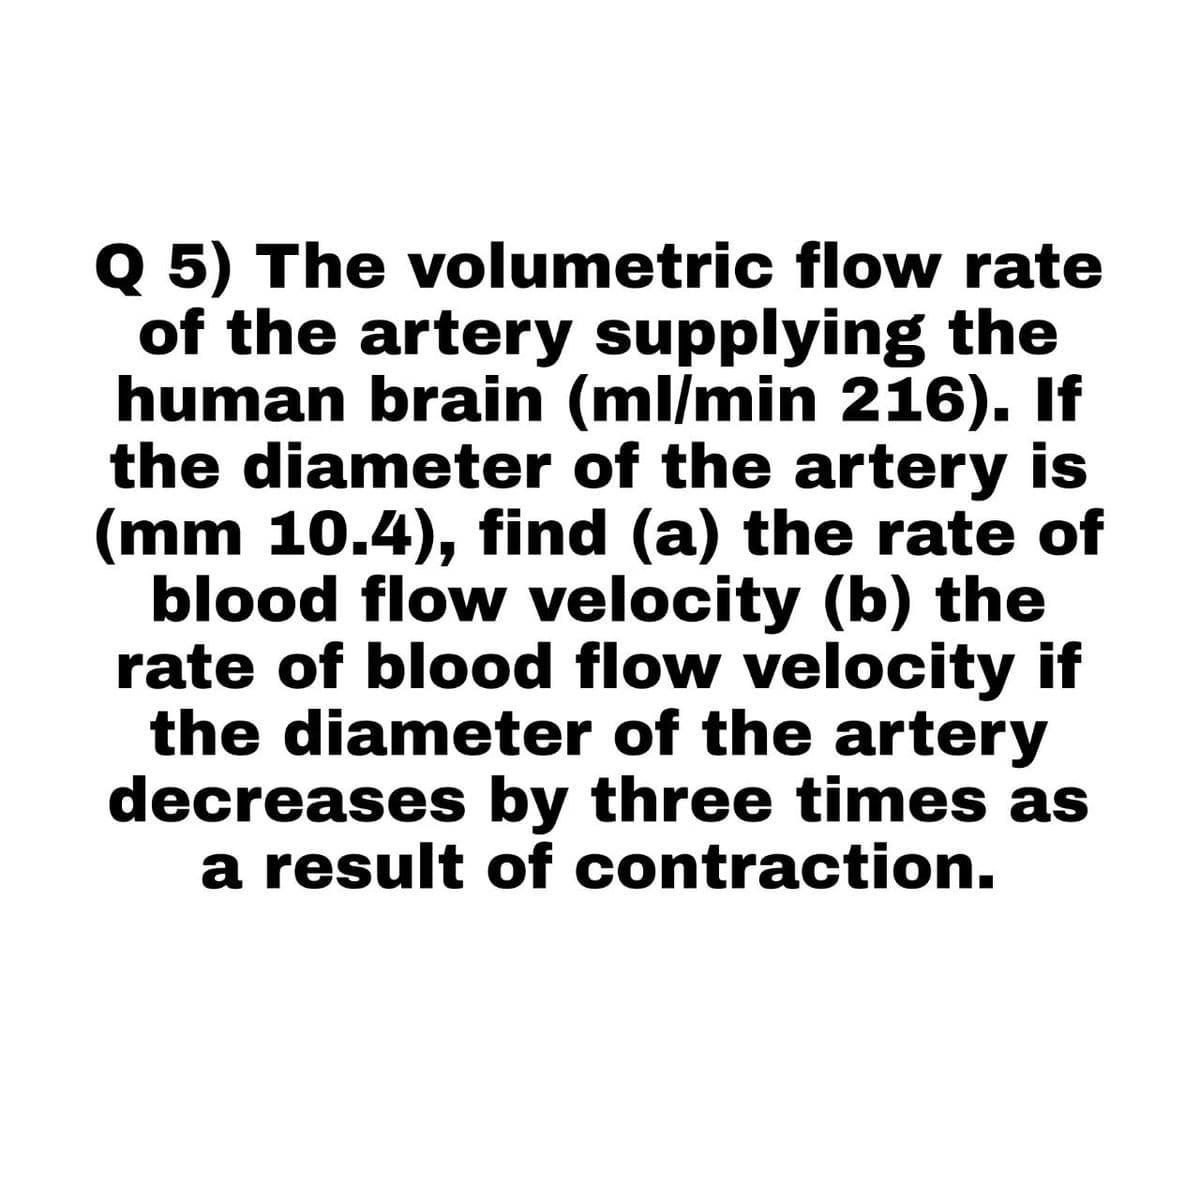 Q 5) The volumetric flow rate
of the artery supplying the
human brain (ml/min 216). If
the diameter of the artery is
(mm 10.4), find (a) the rate of
blood flow velocity (b) the
rate of blood flow velocity if
the diameter of the artery
decreases by three times as
a result of contraction.
